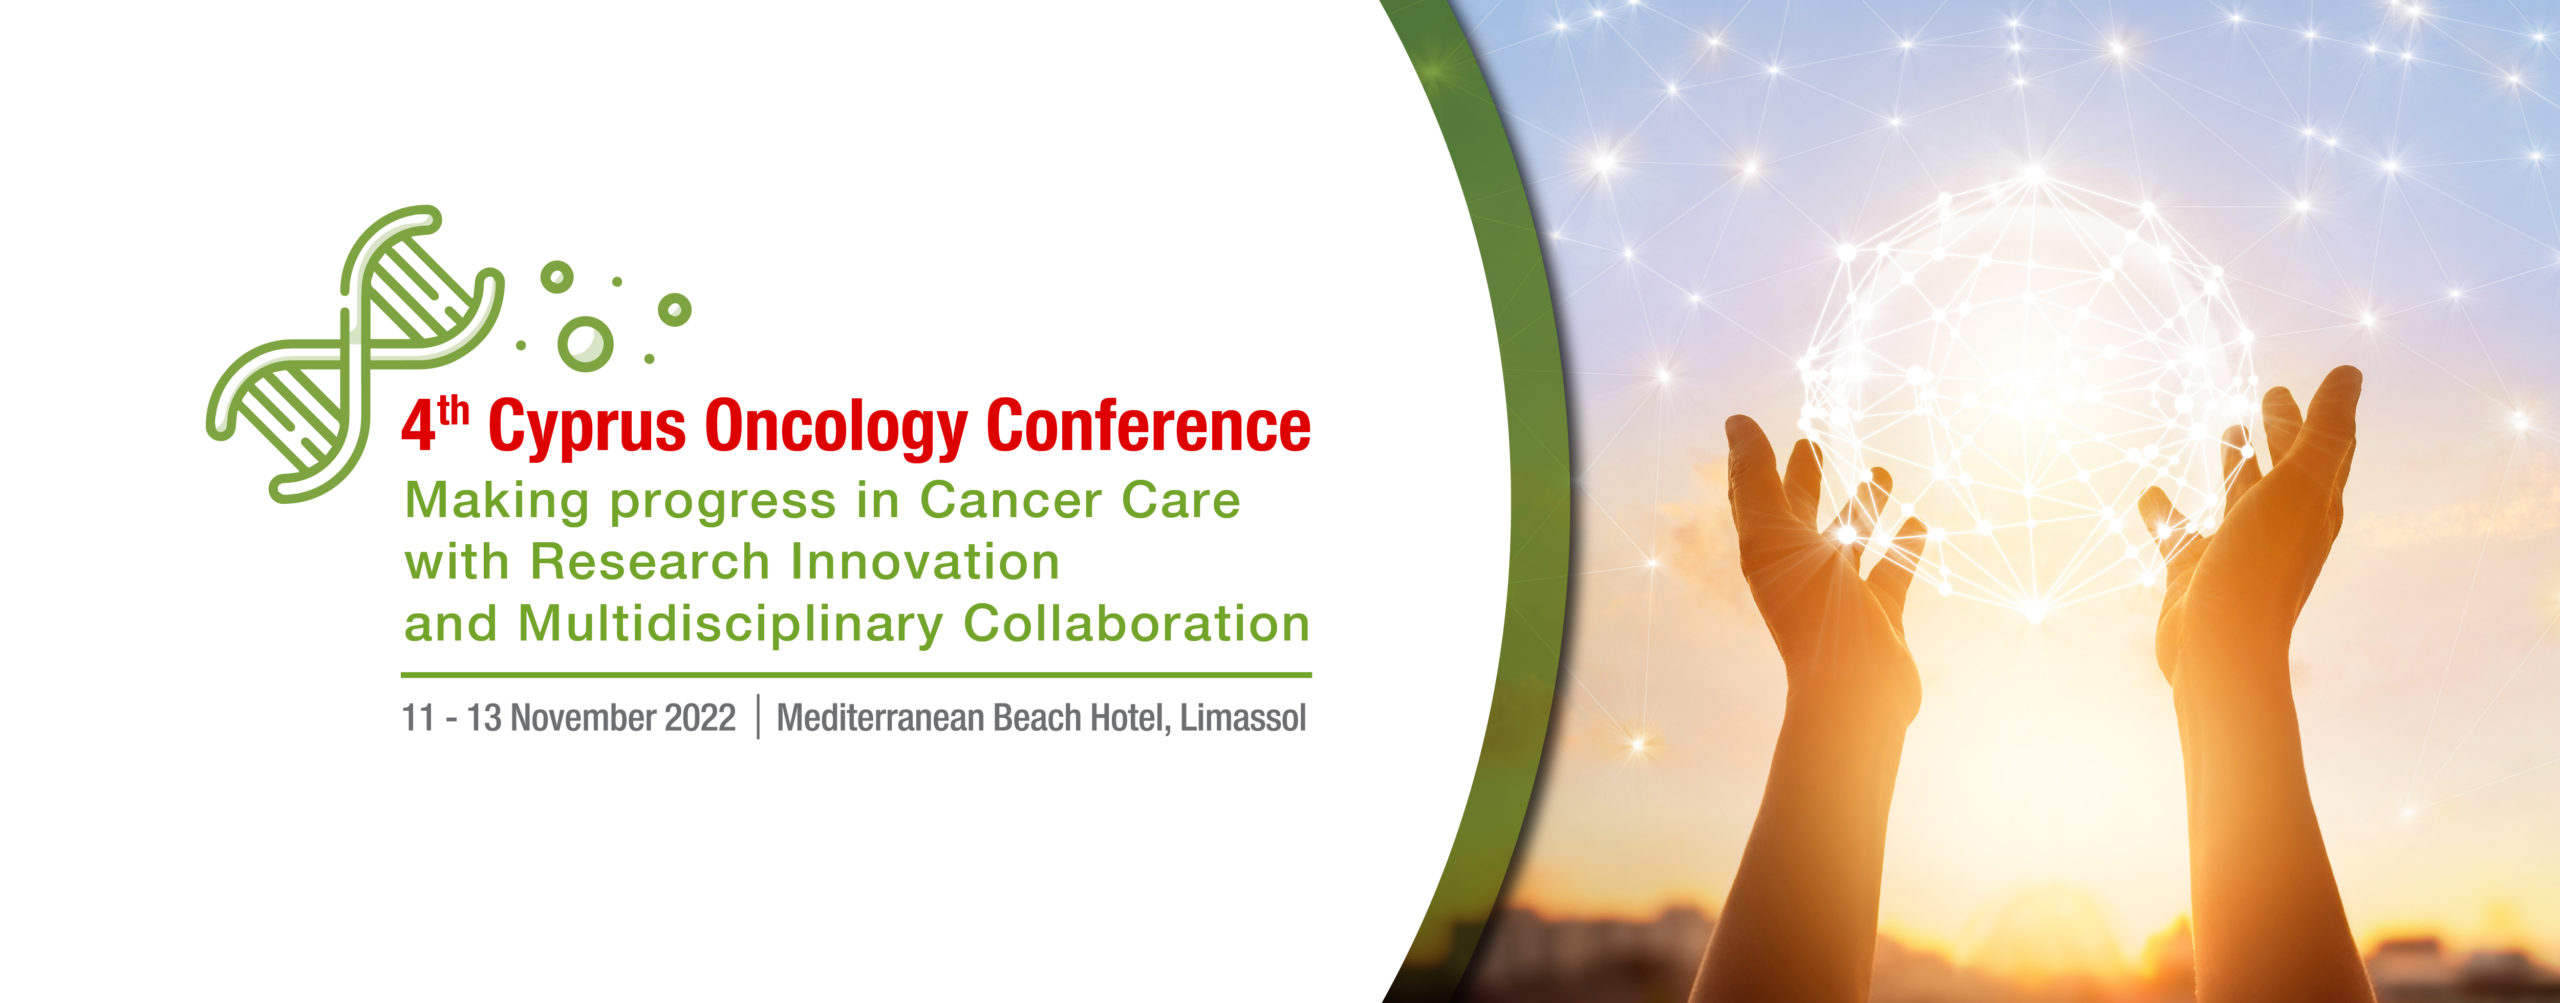 Oncology Conference Cyprus